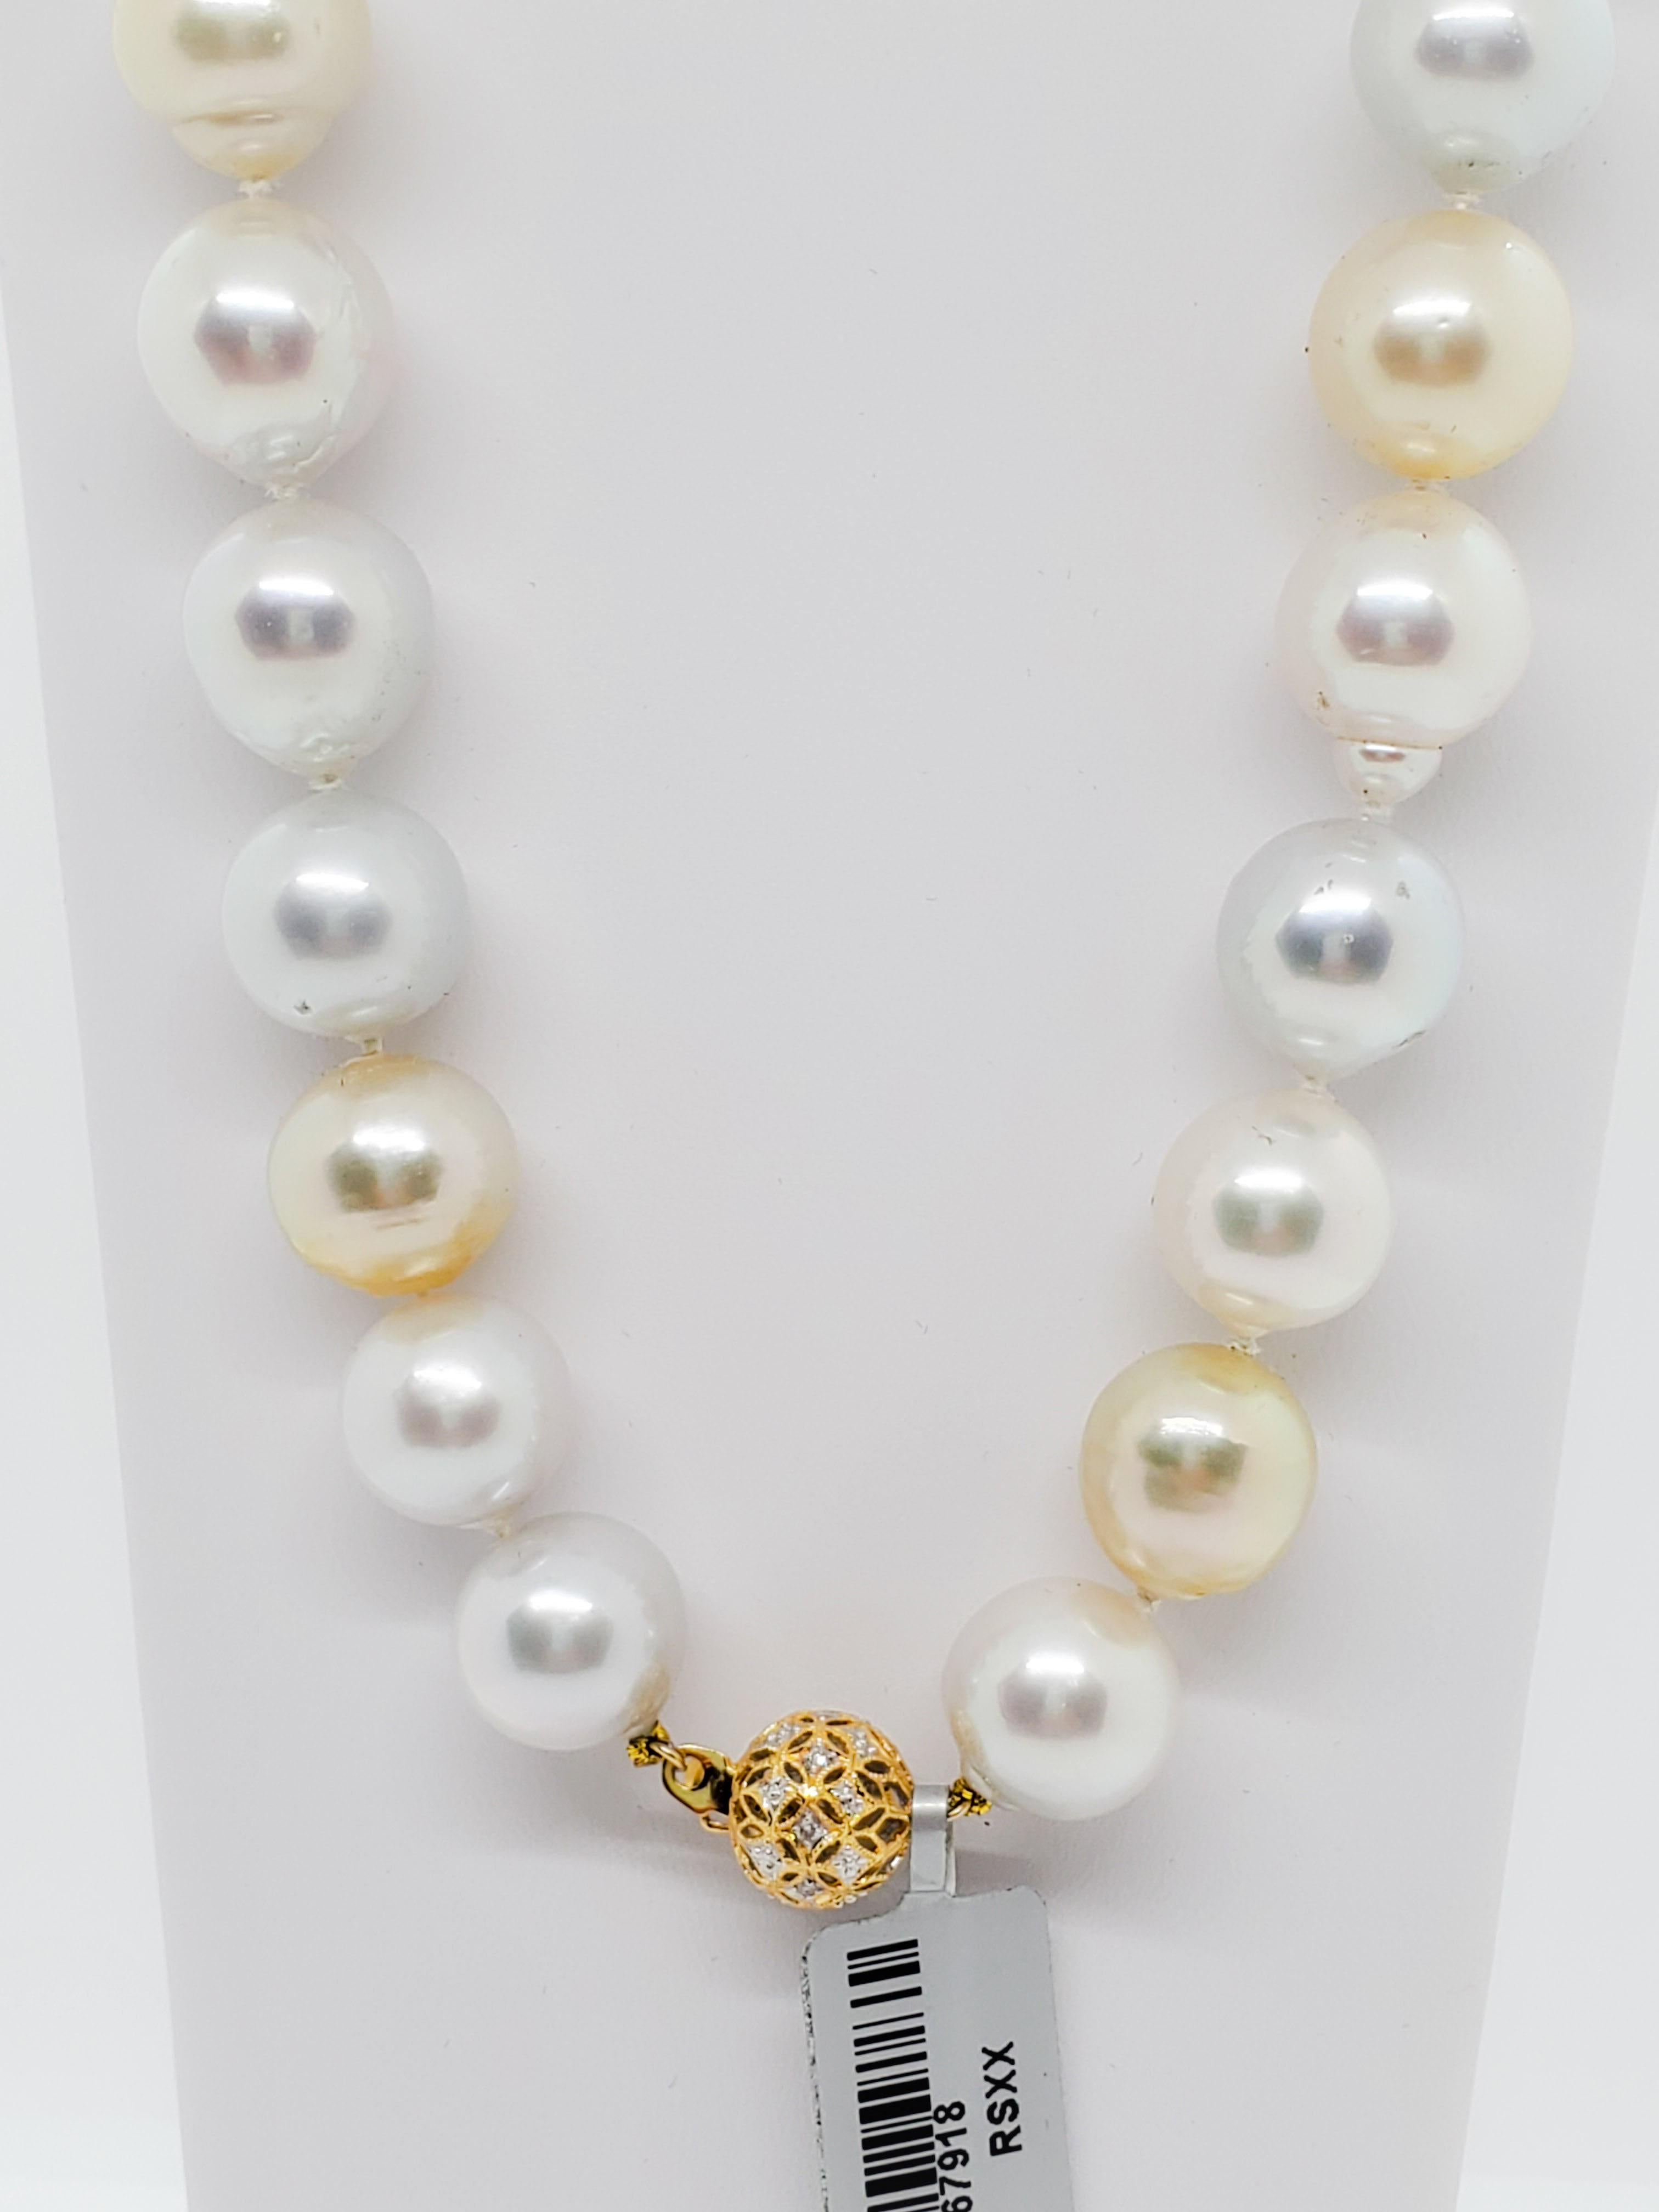  White and Yellow South Sea Pearl Necklace with Diamond Clasp For Sale 1